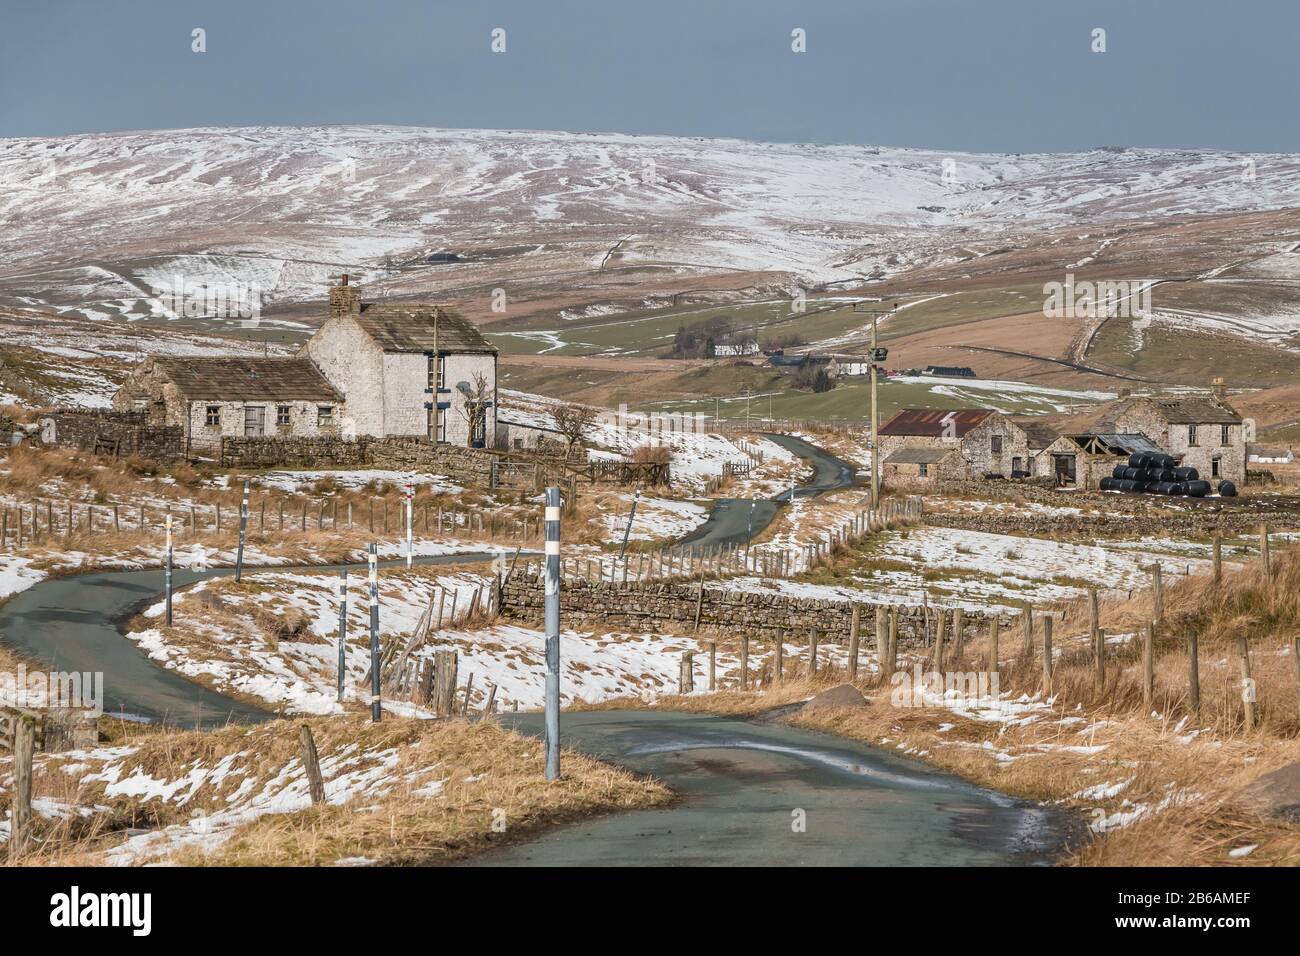 The remote hill farming community of Harwood, at the head of Teesdale, high in the North Pennines AONB Stock Photo